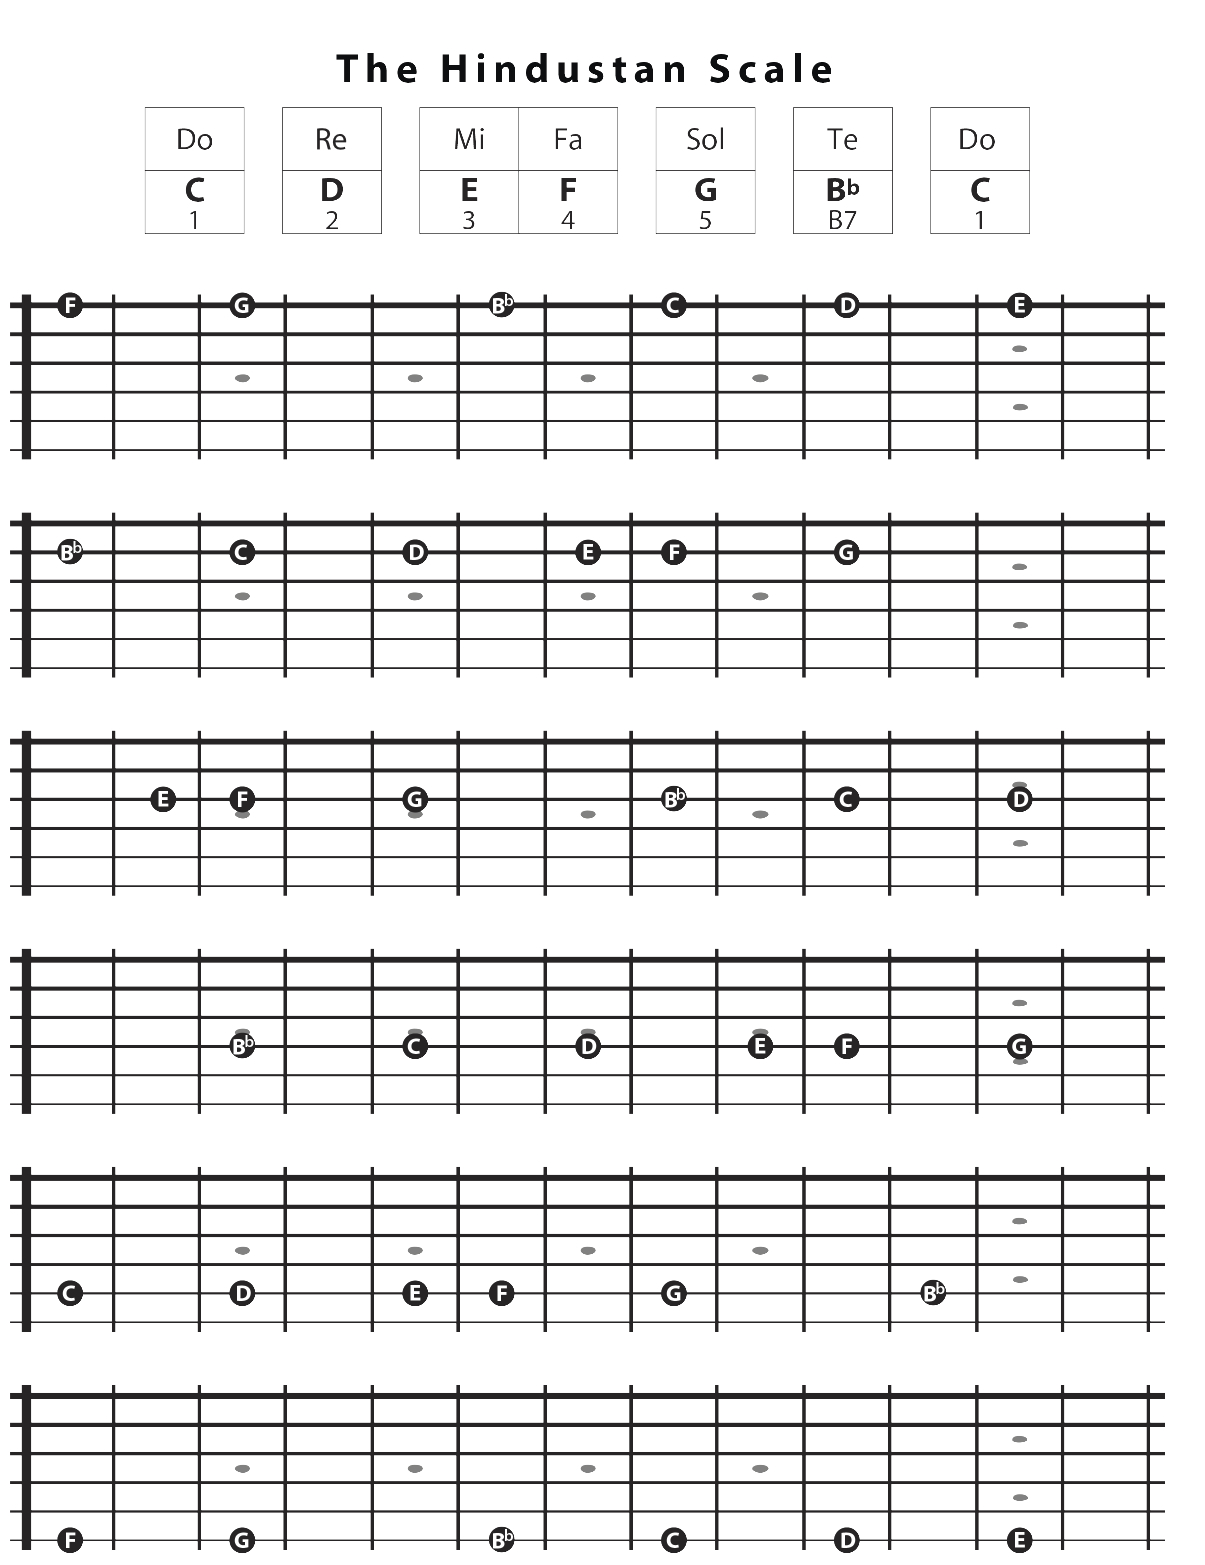 The Hindustan scale in the key of C on every string